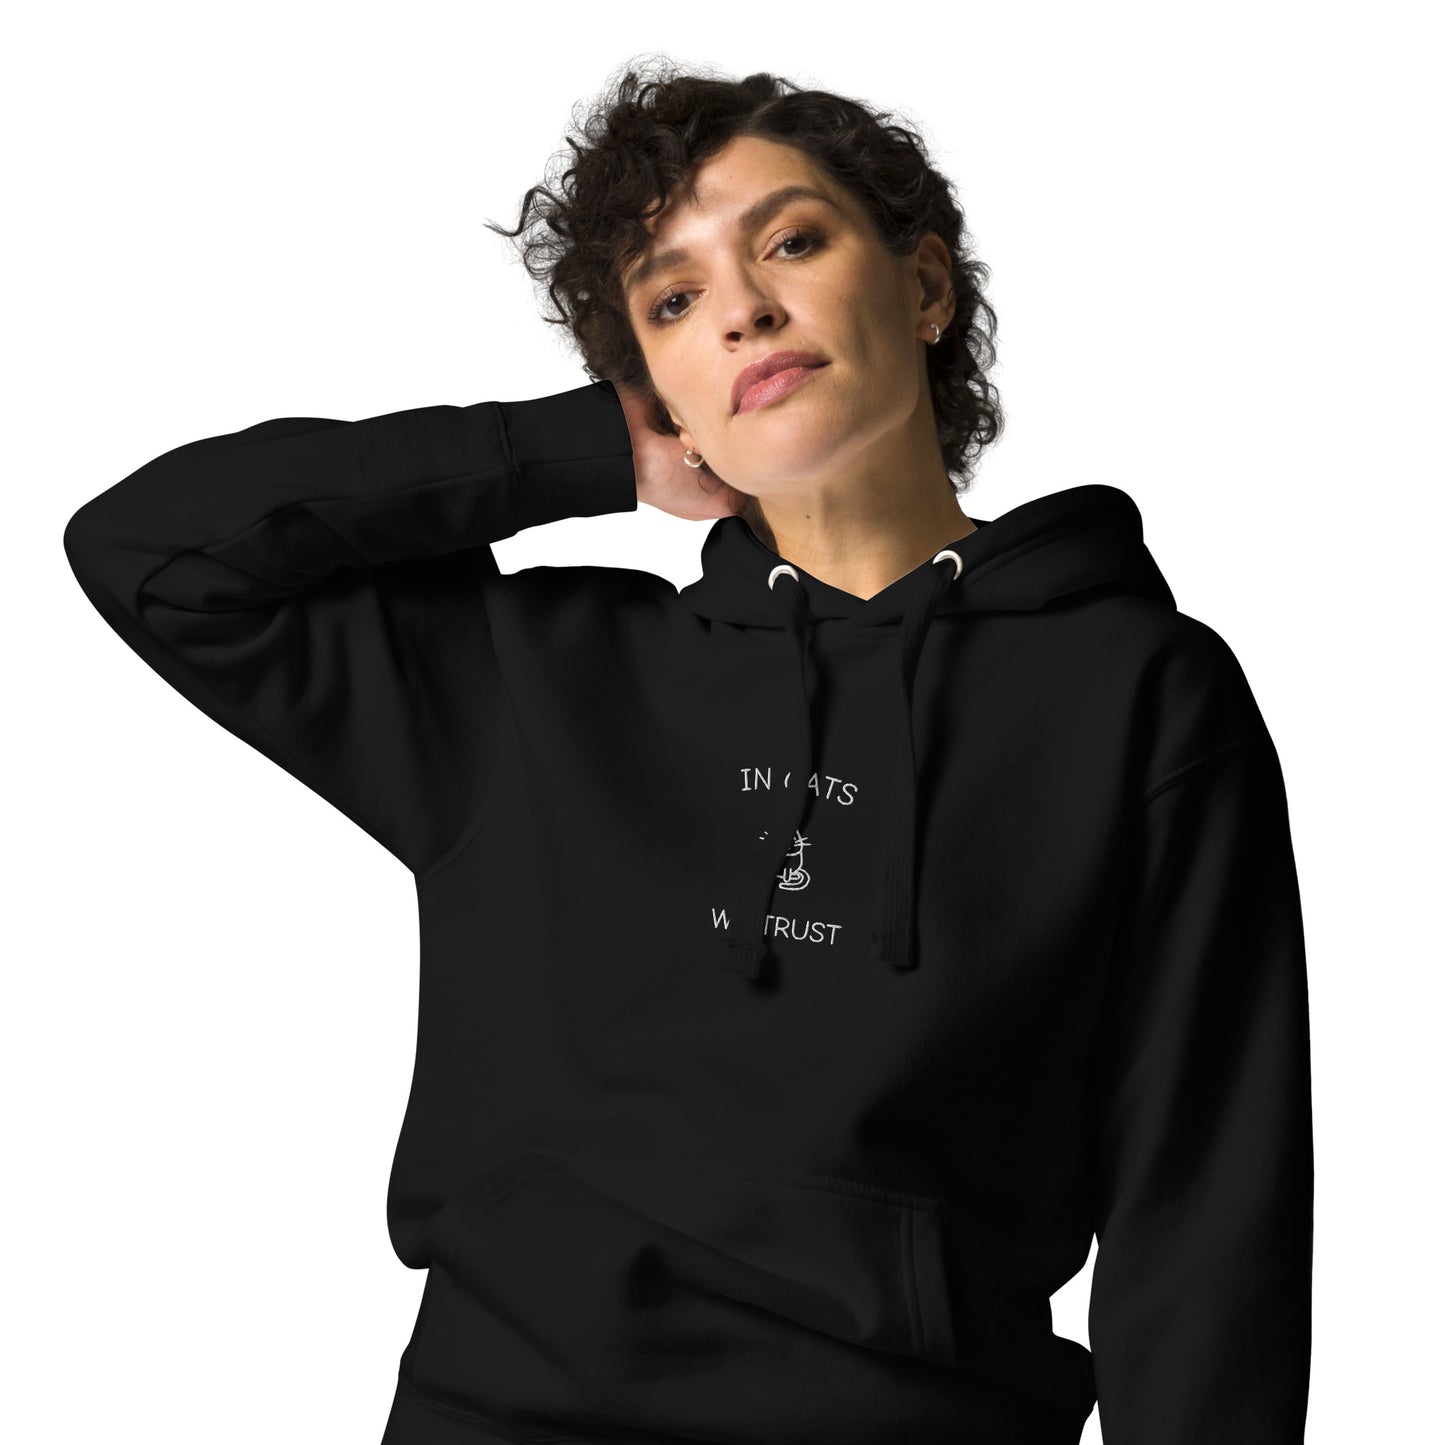 IN CATS WE TRUST - embroidered hoodie